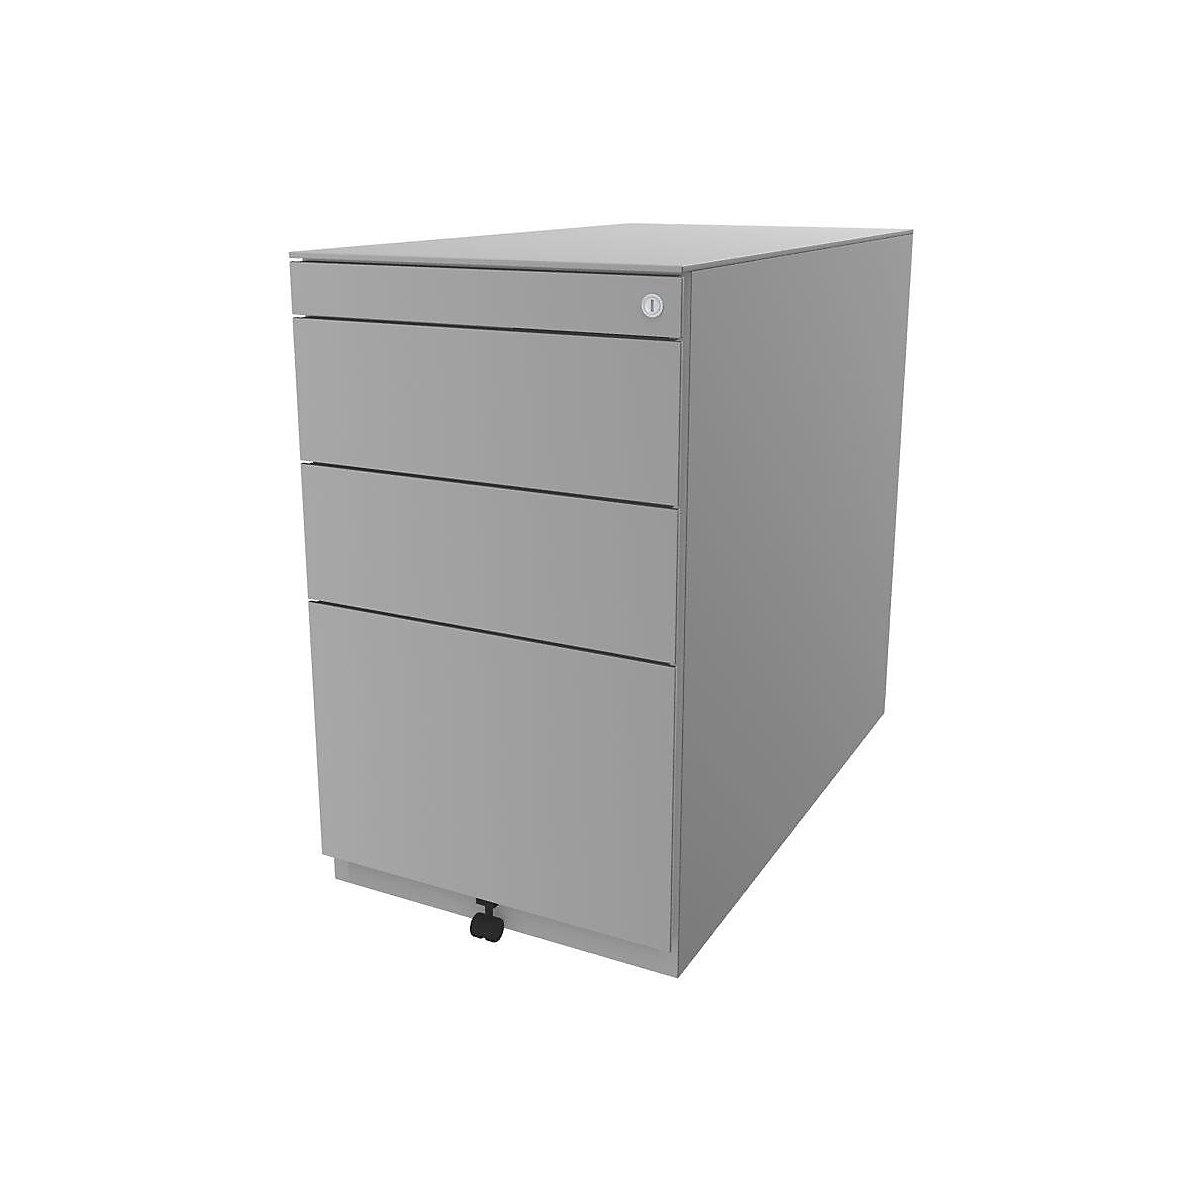 Note™ fixed pedestal, with 2 universal drawers, 1 suspension file drawer – BISLEY, with top, depth 775 mm, light grey-11